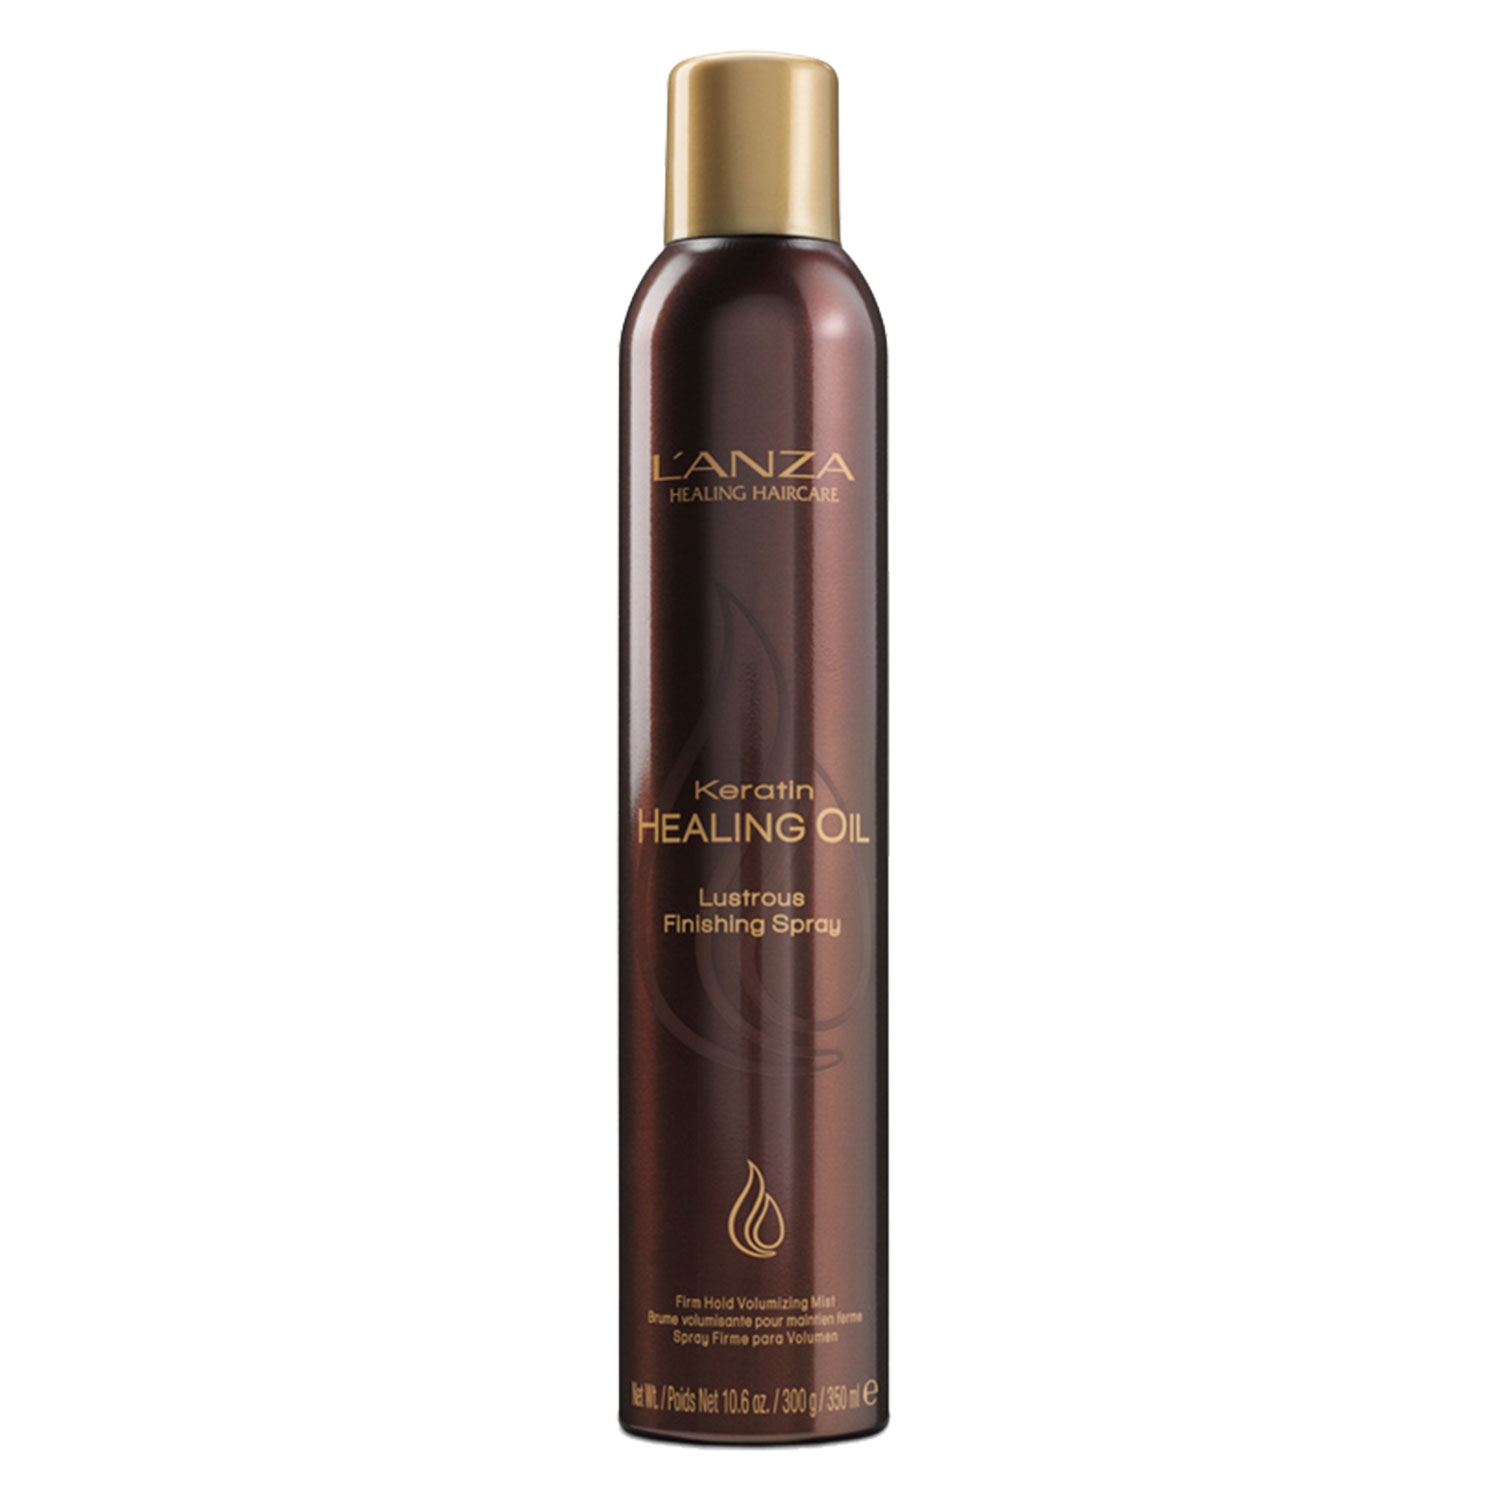 Product image from Keratin Healing Oil - Lustrous Finishing Spray